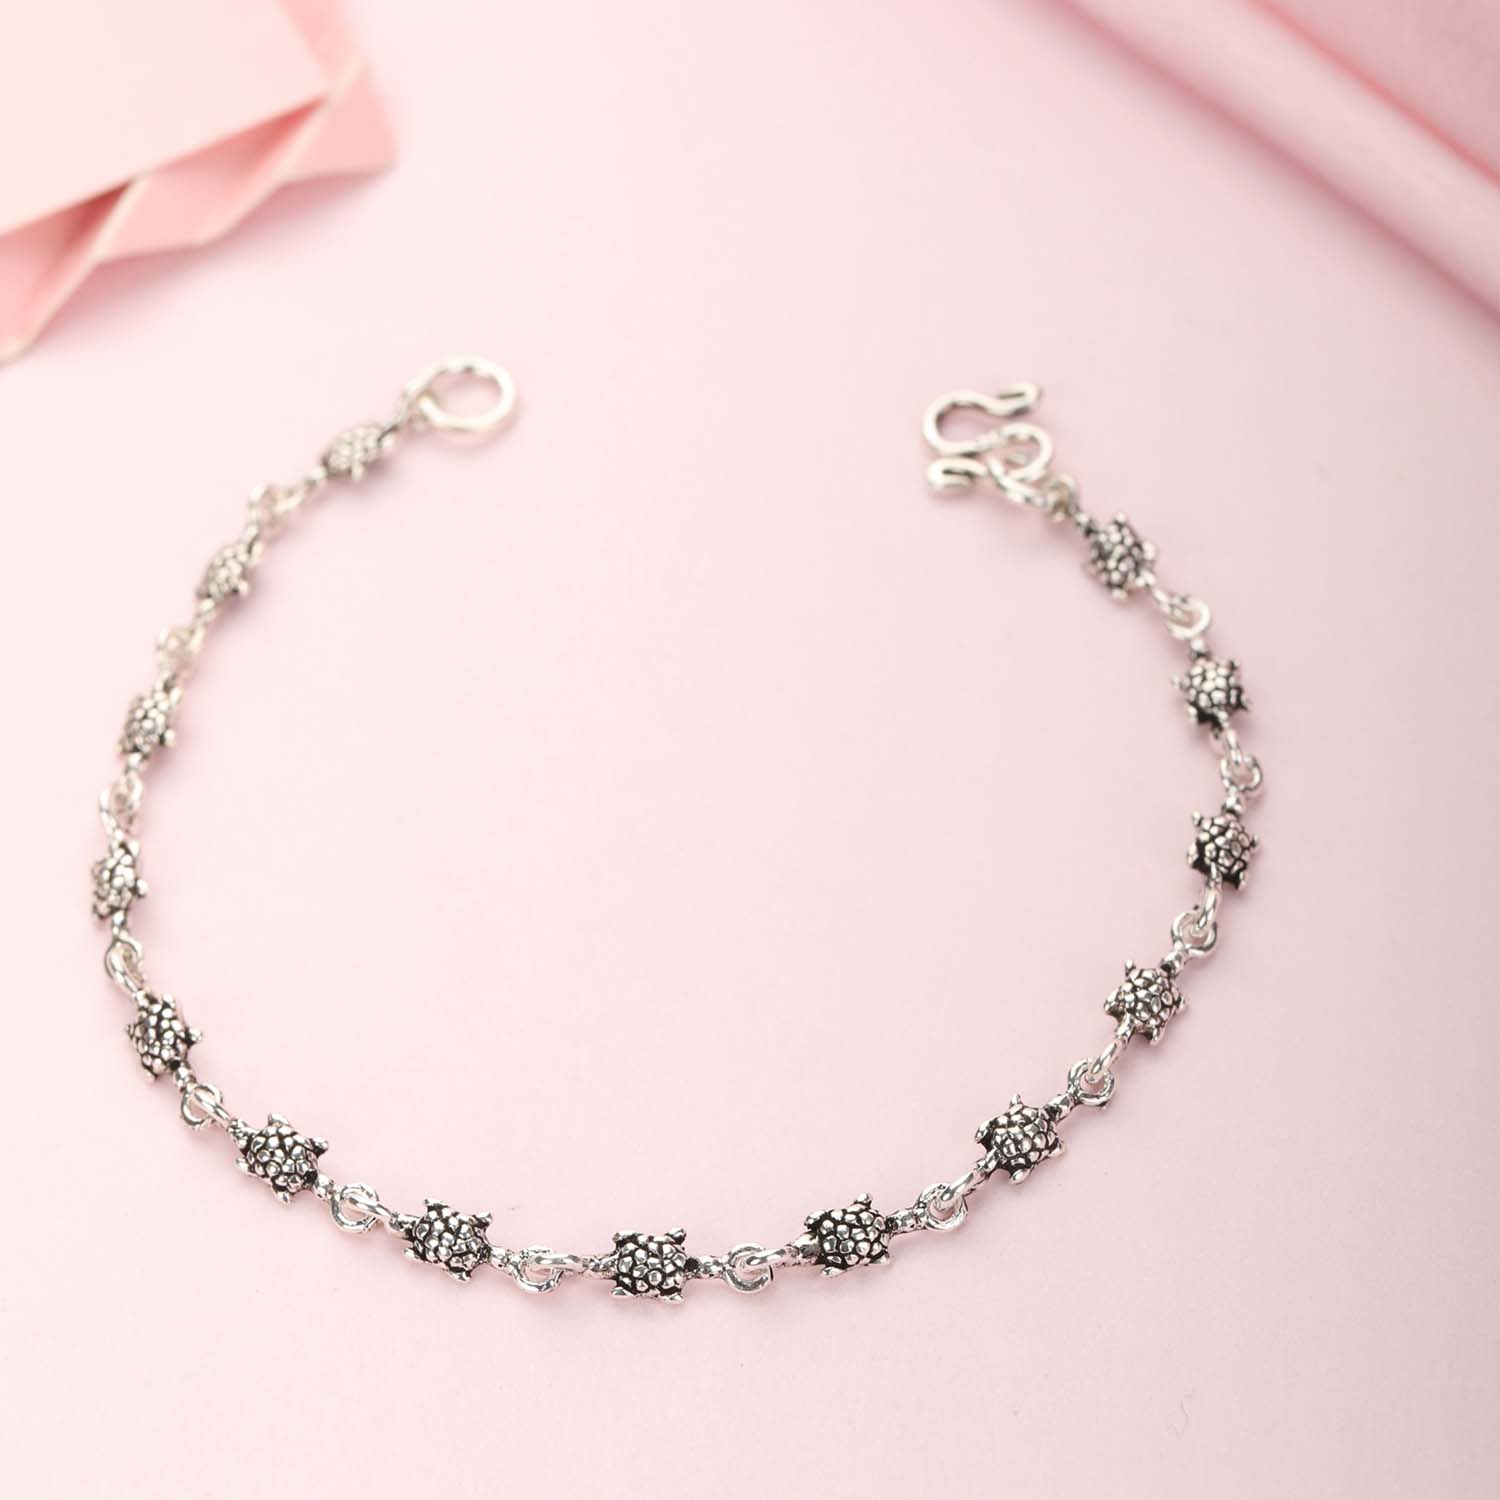 Turtle-y in Love With This 925 Silver Bracelet